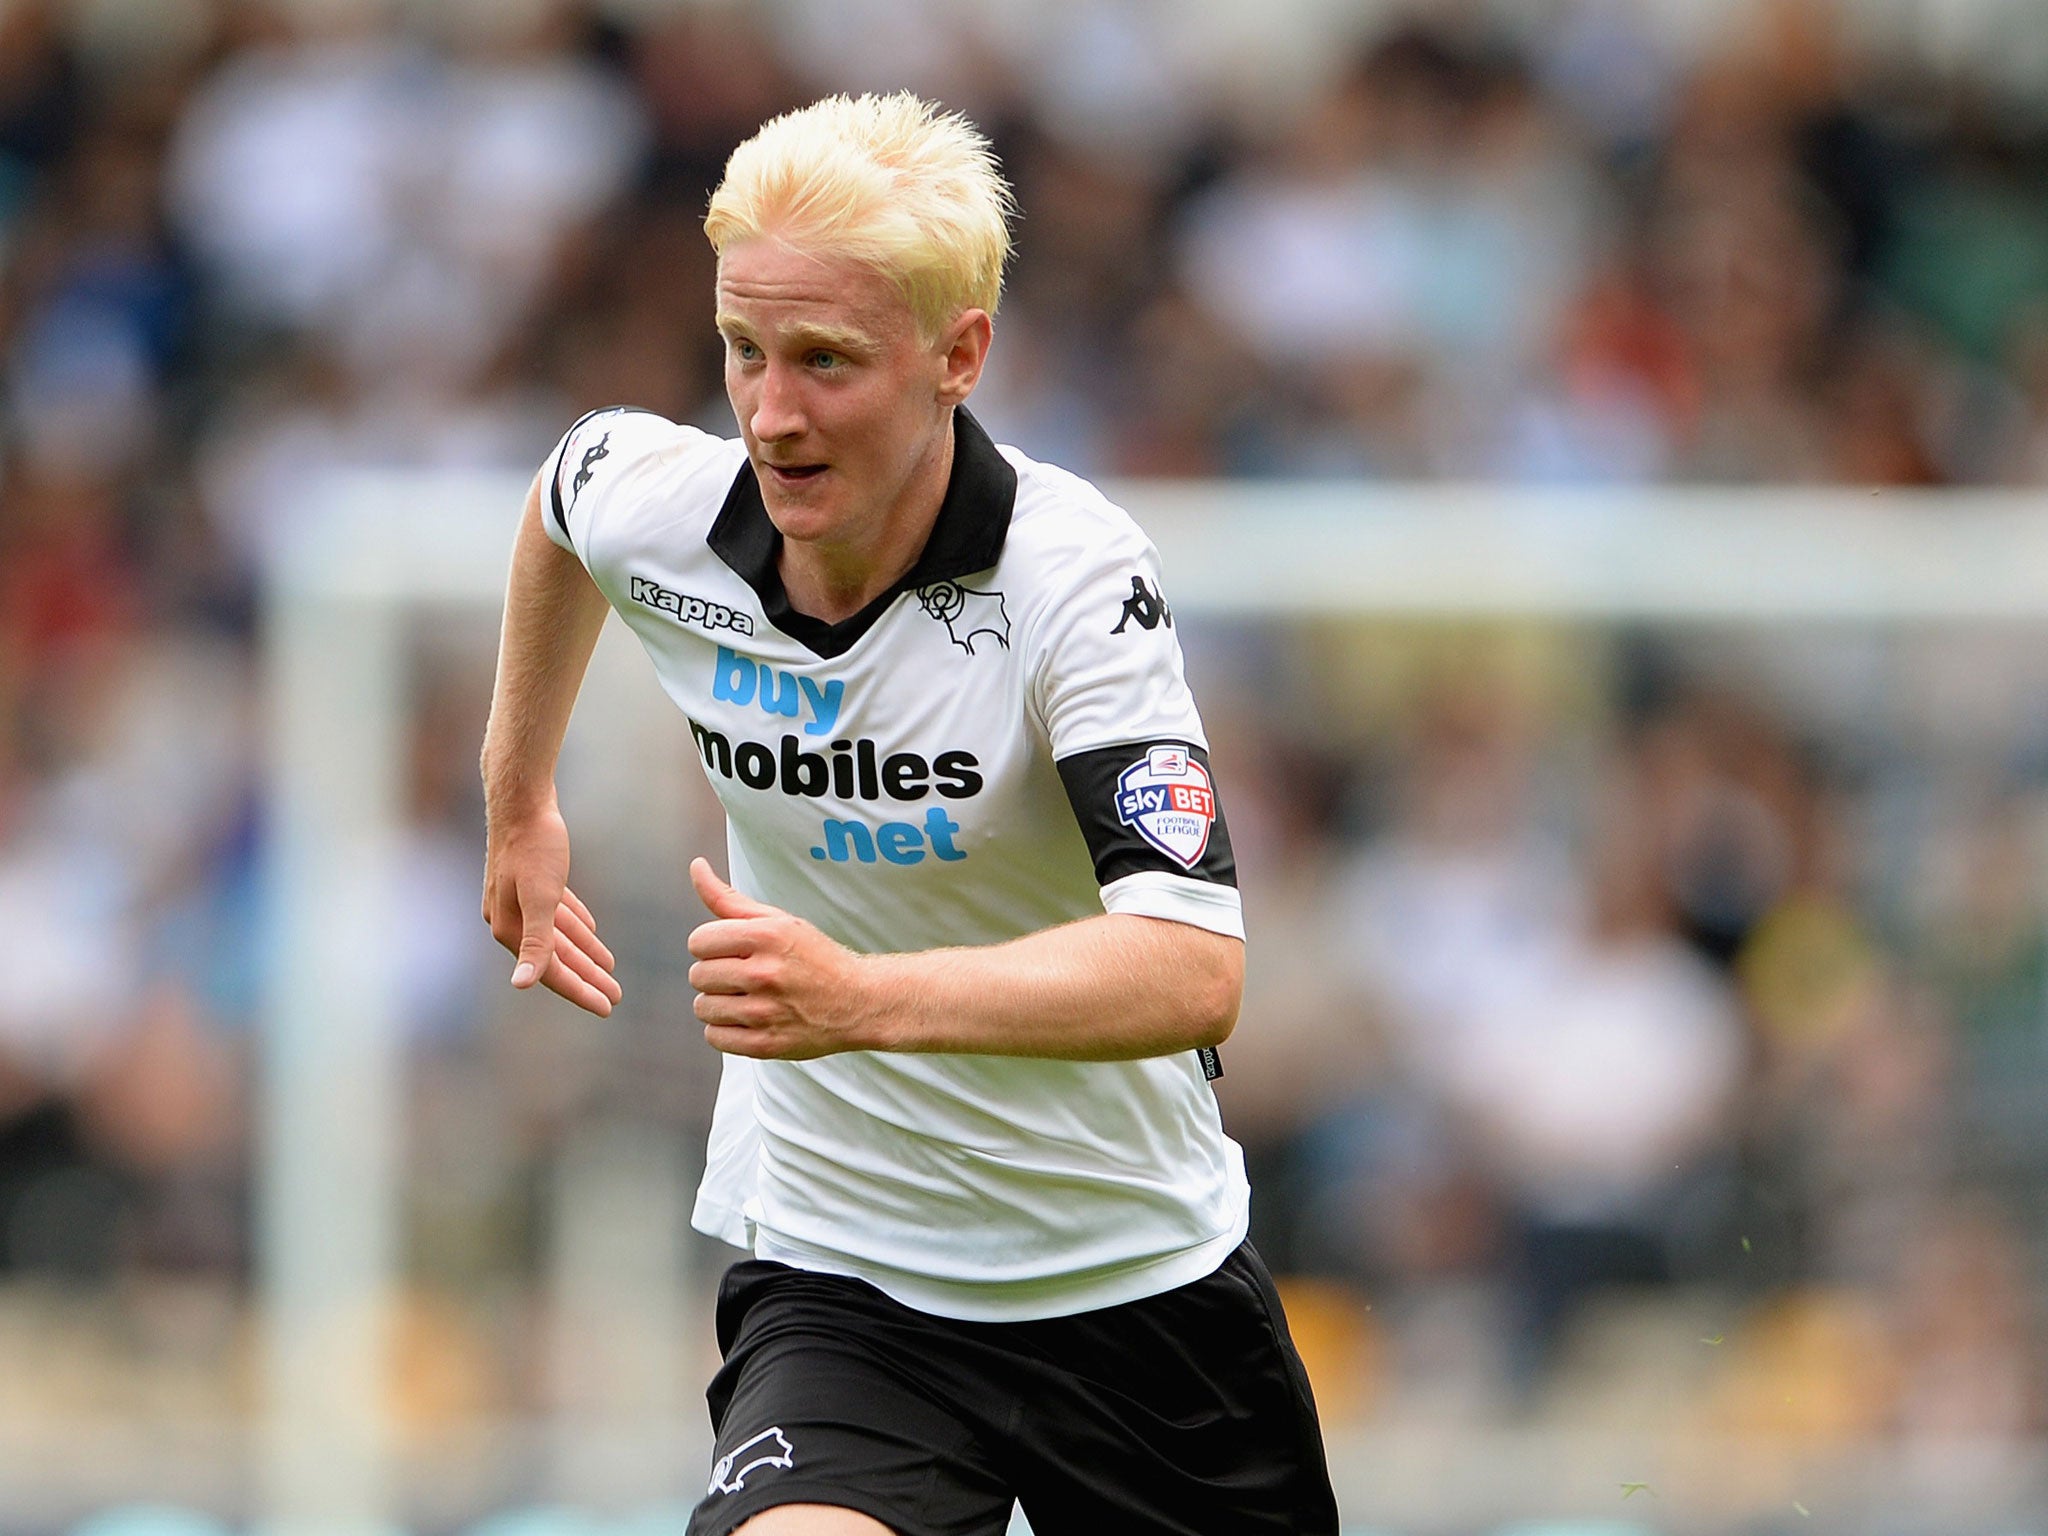 Midfielder Will Hughes is only 18 but has become a Derby regular